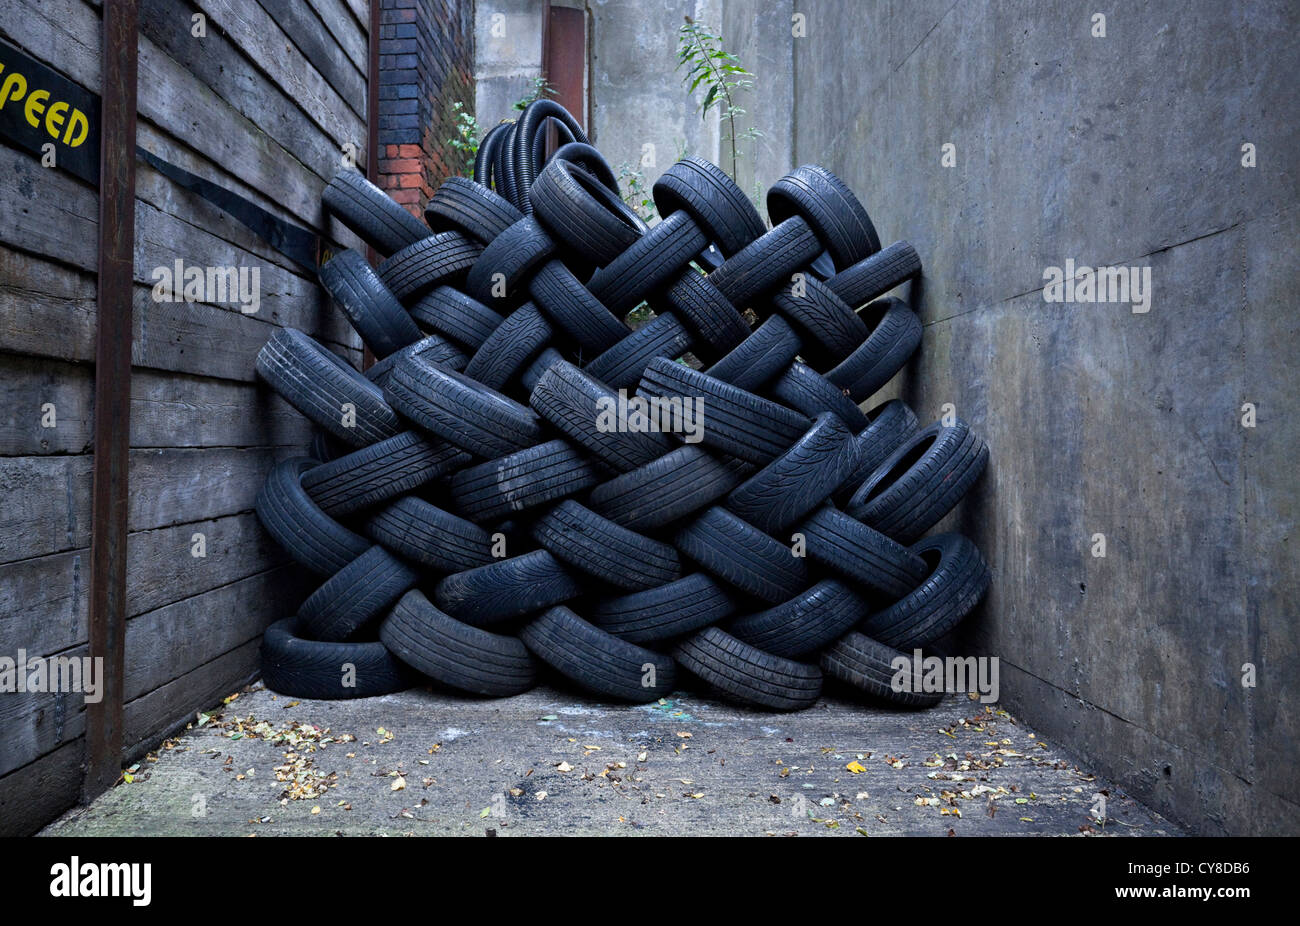 Used tyres stacked up. Stock Photo